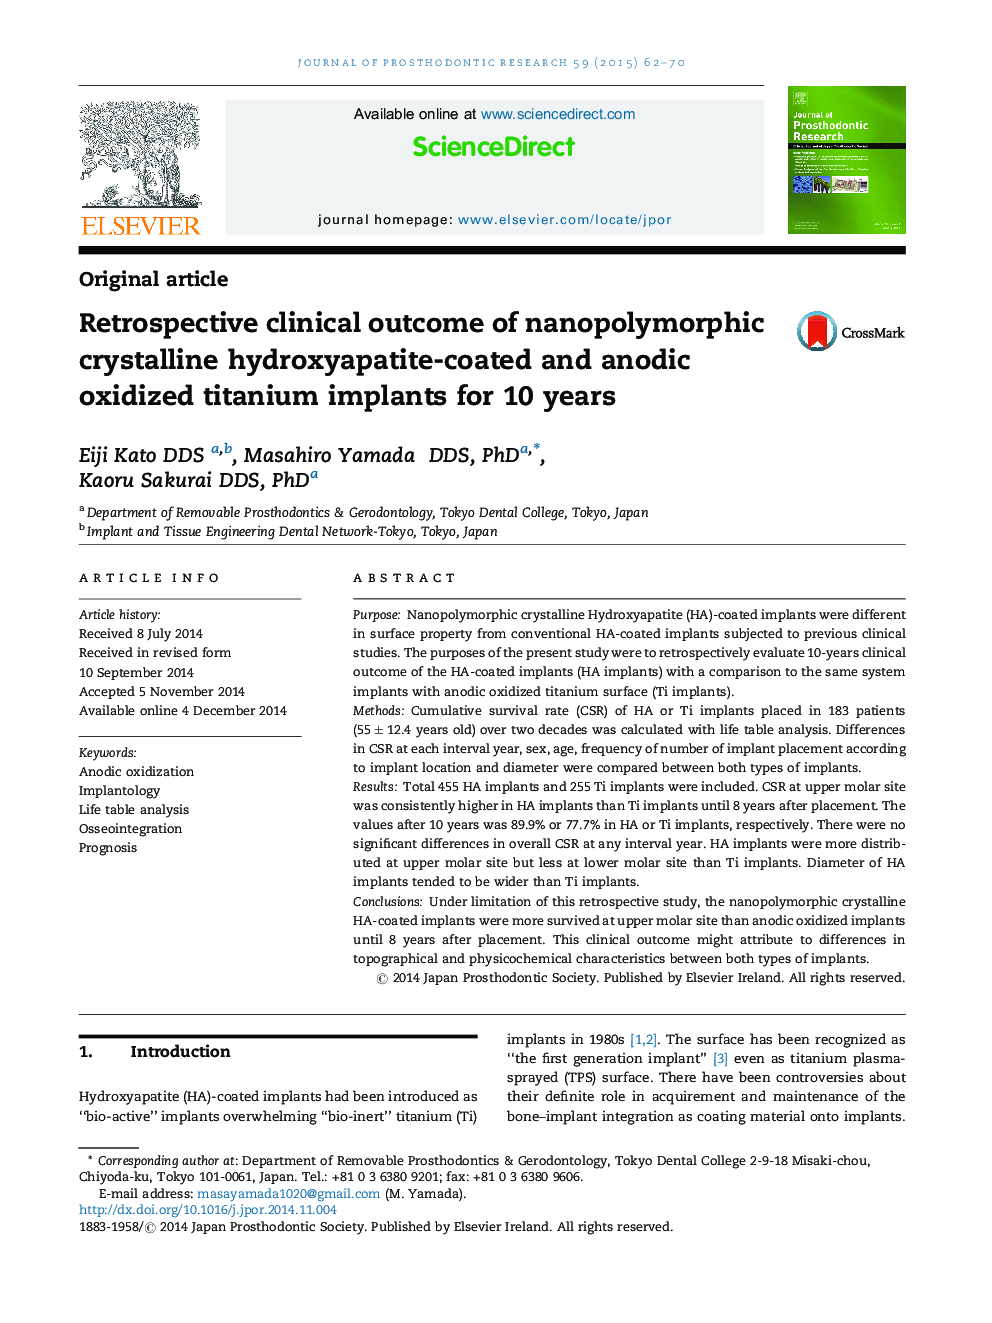 Retrospective clinical outcome of nanopolymorphic crystalline hydroxyapatite-coated and anodic oxidized titanium implants for 10 years